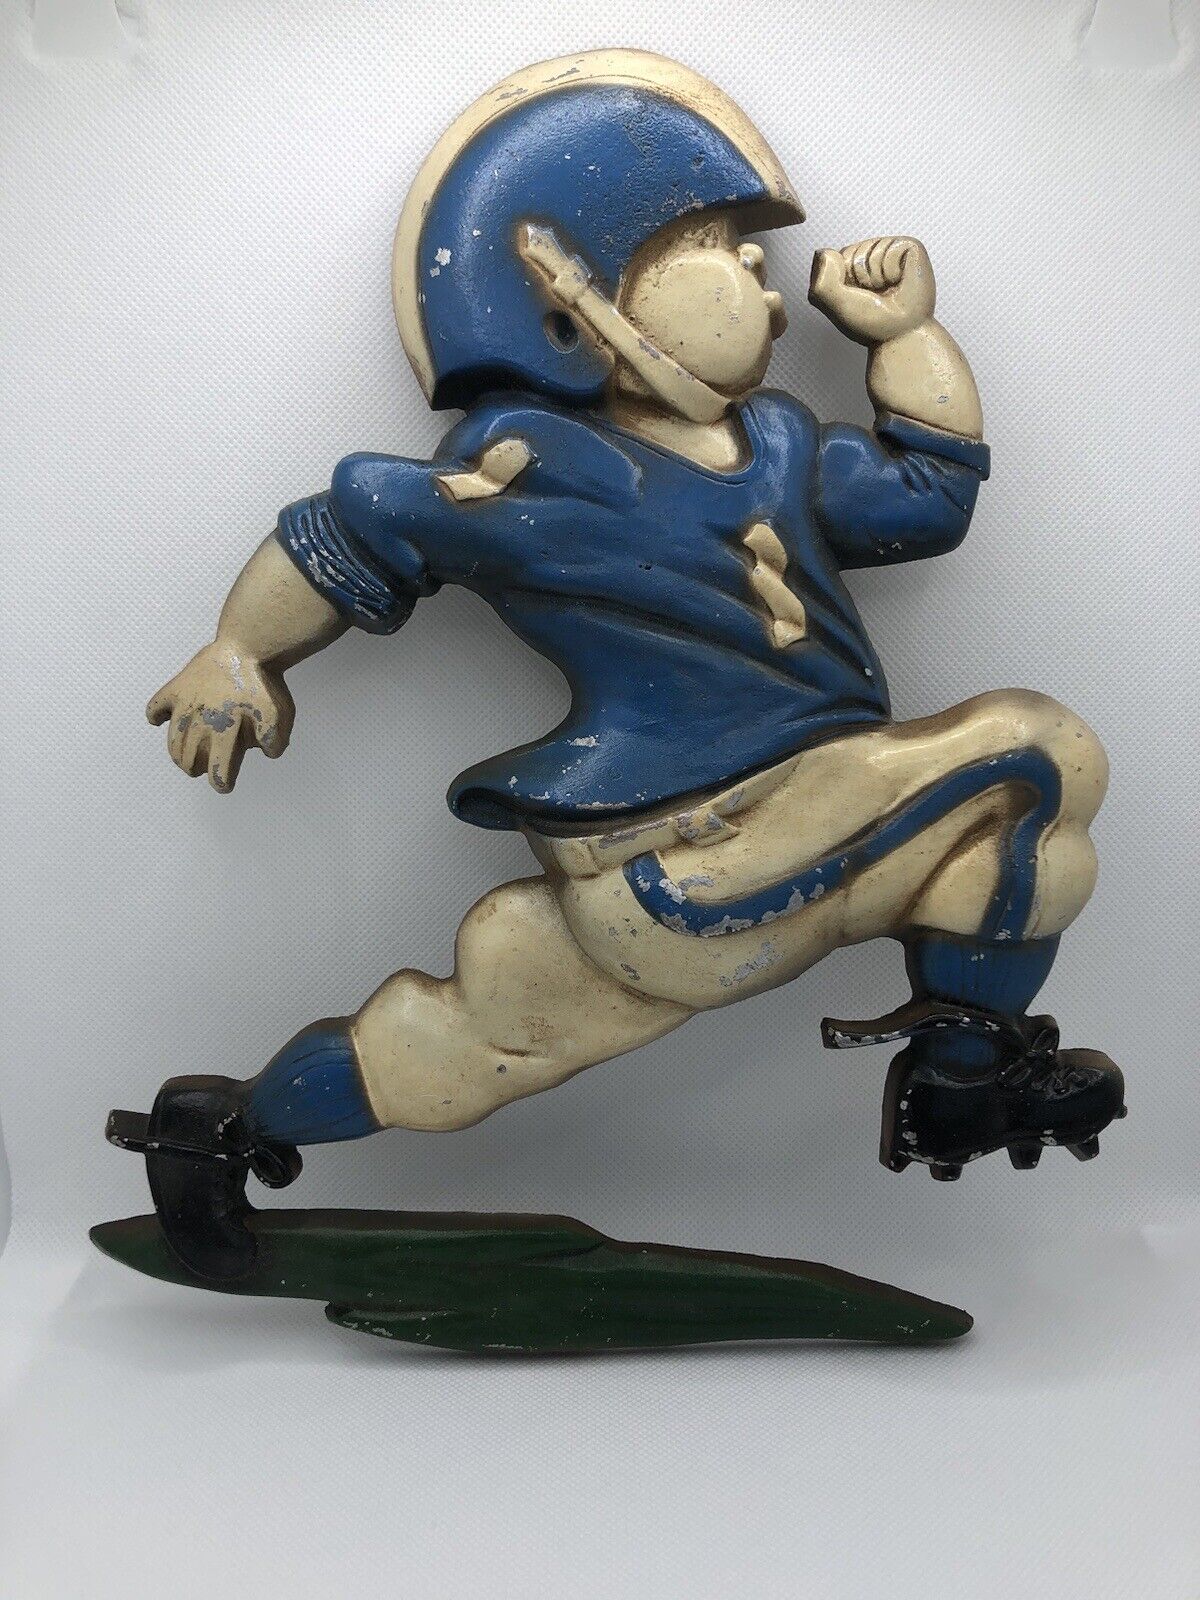 Vintage 1976 HOMCO Cast Metal Football Player Hanging Wall Plaque 9.75”